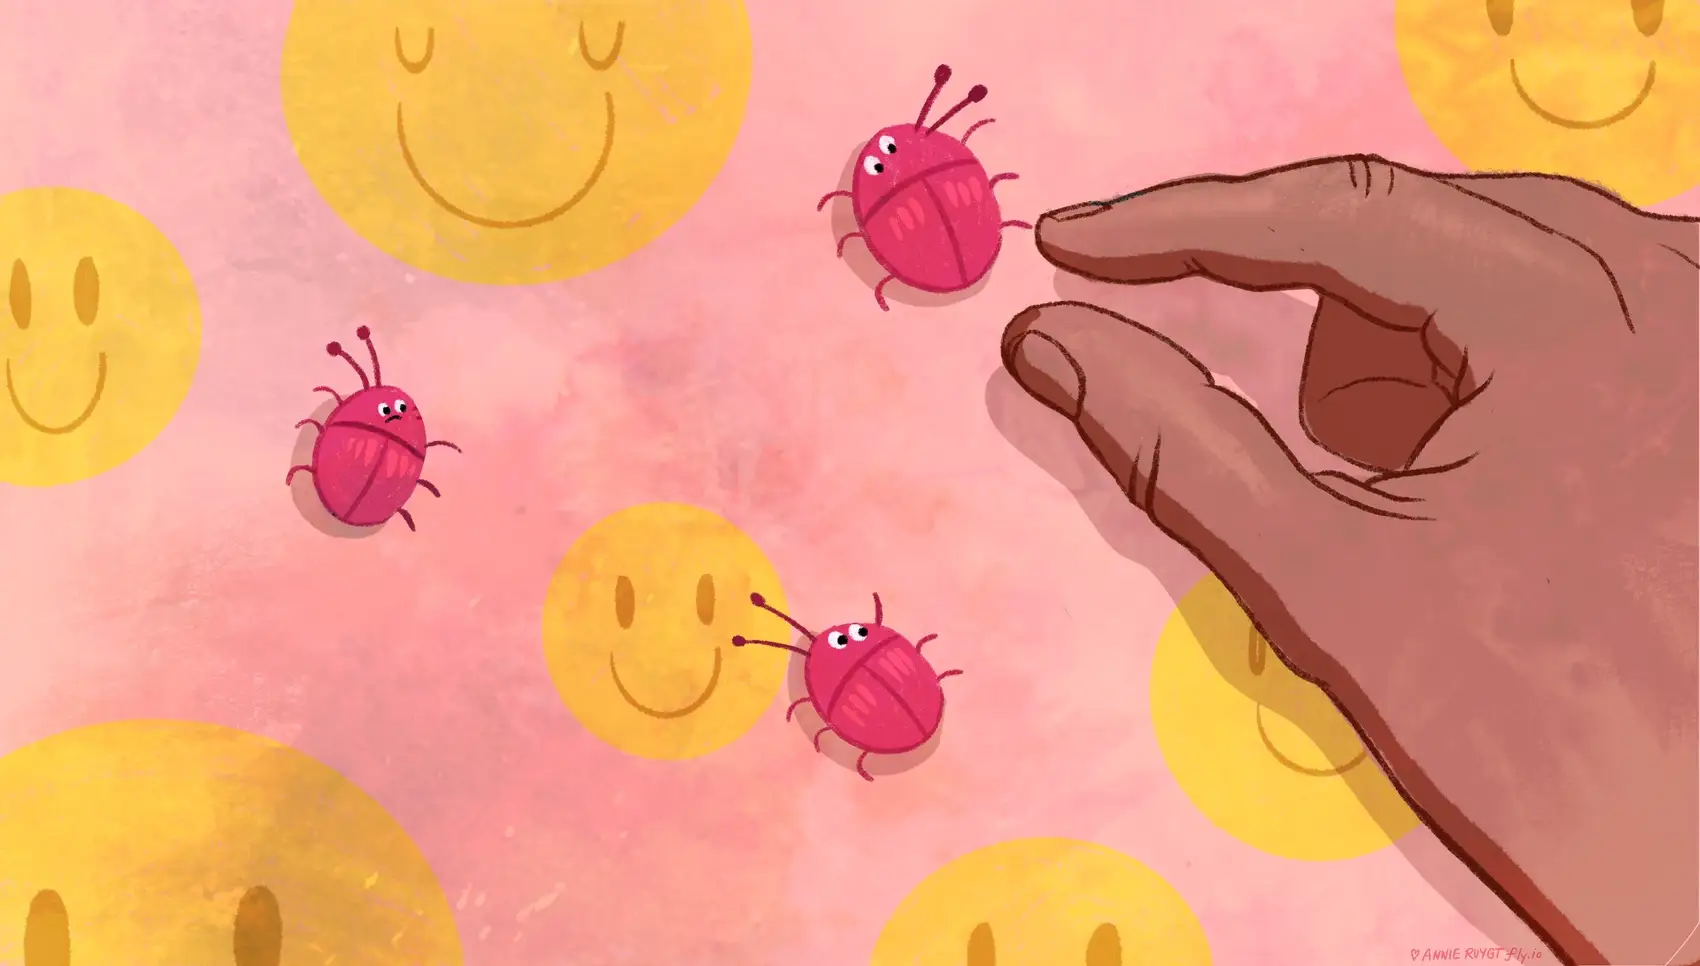 a hand picking up happy bugs with smiley faces in the background